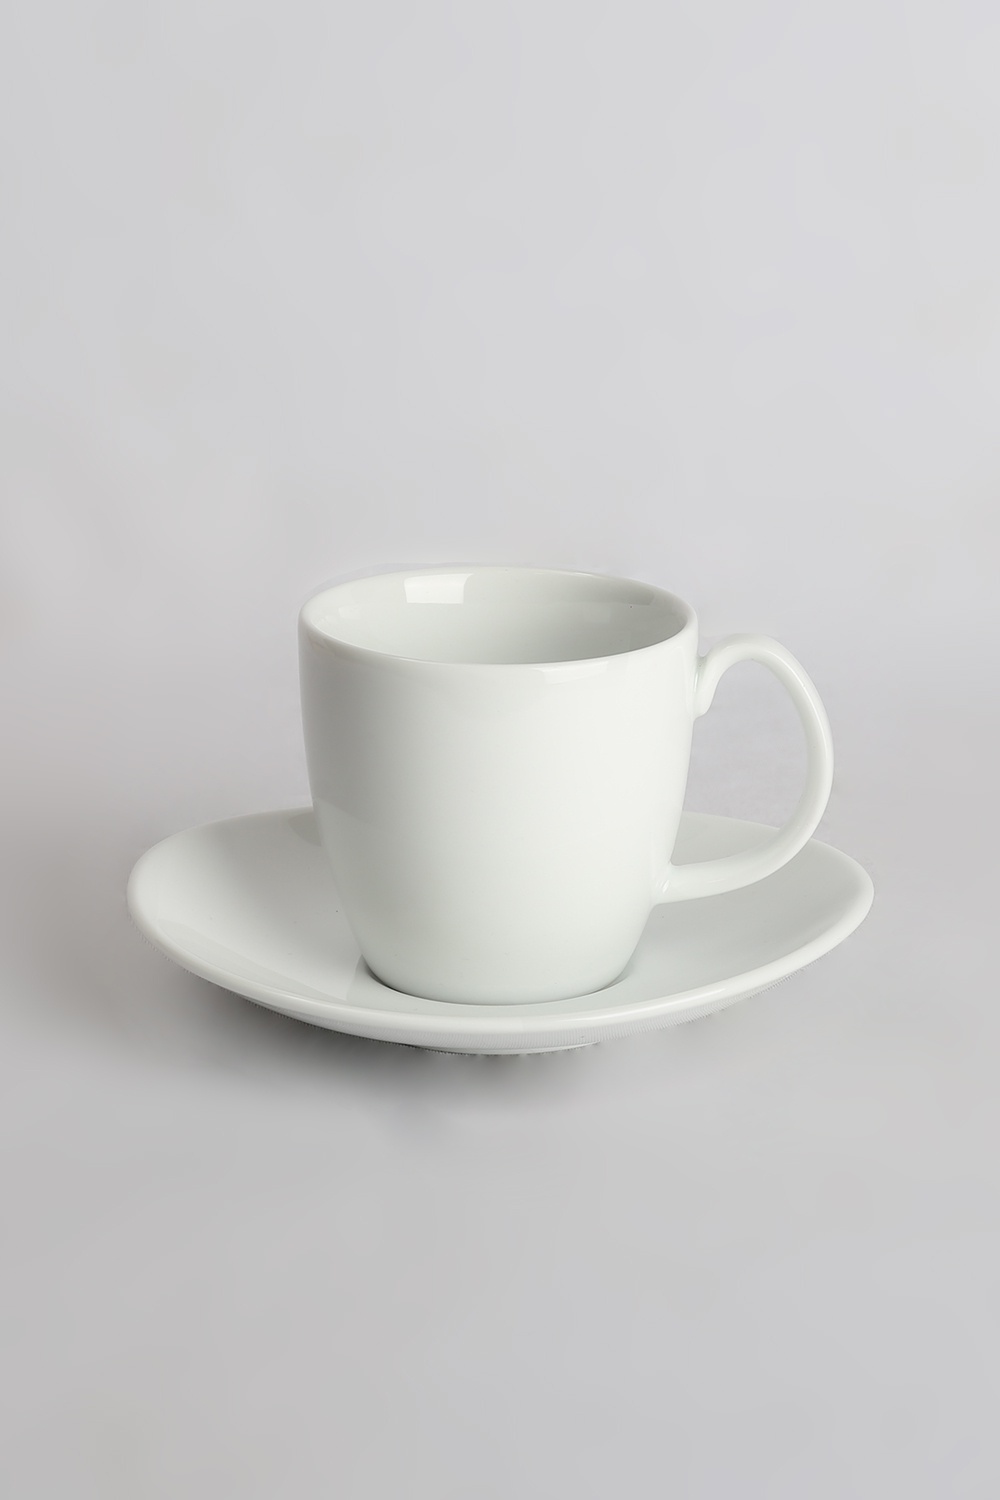 Odel Coffee Cup And Saucer Ceramic White | Odel.lk